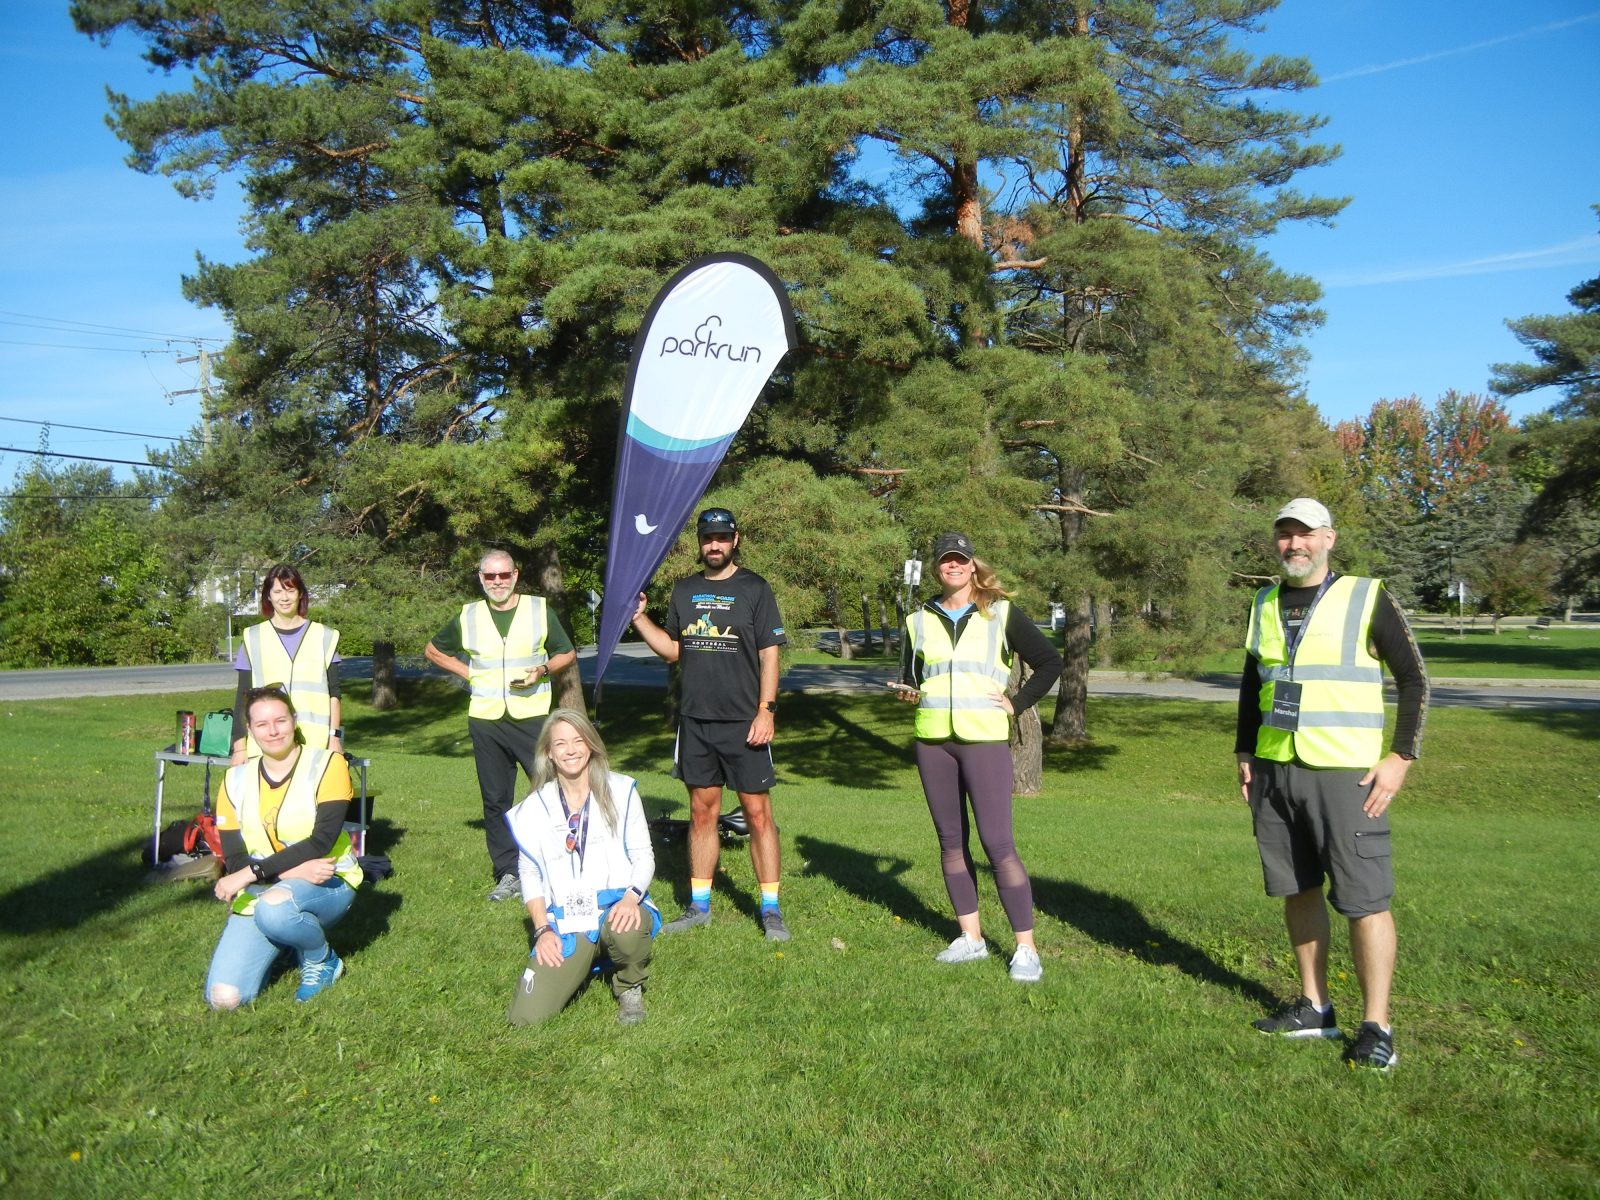 Russell township’s first parkrun gets off on the right foot